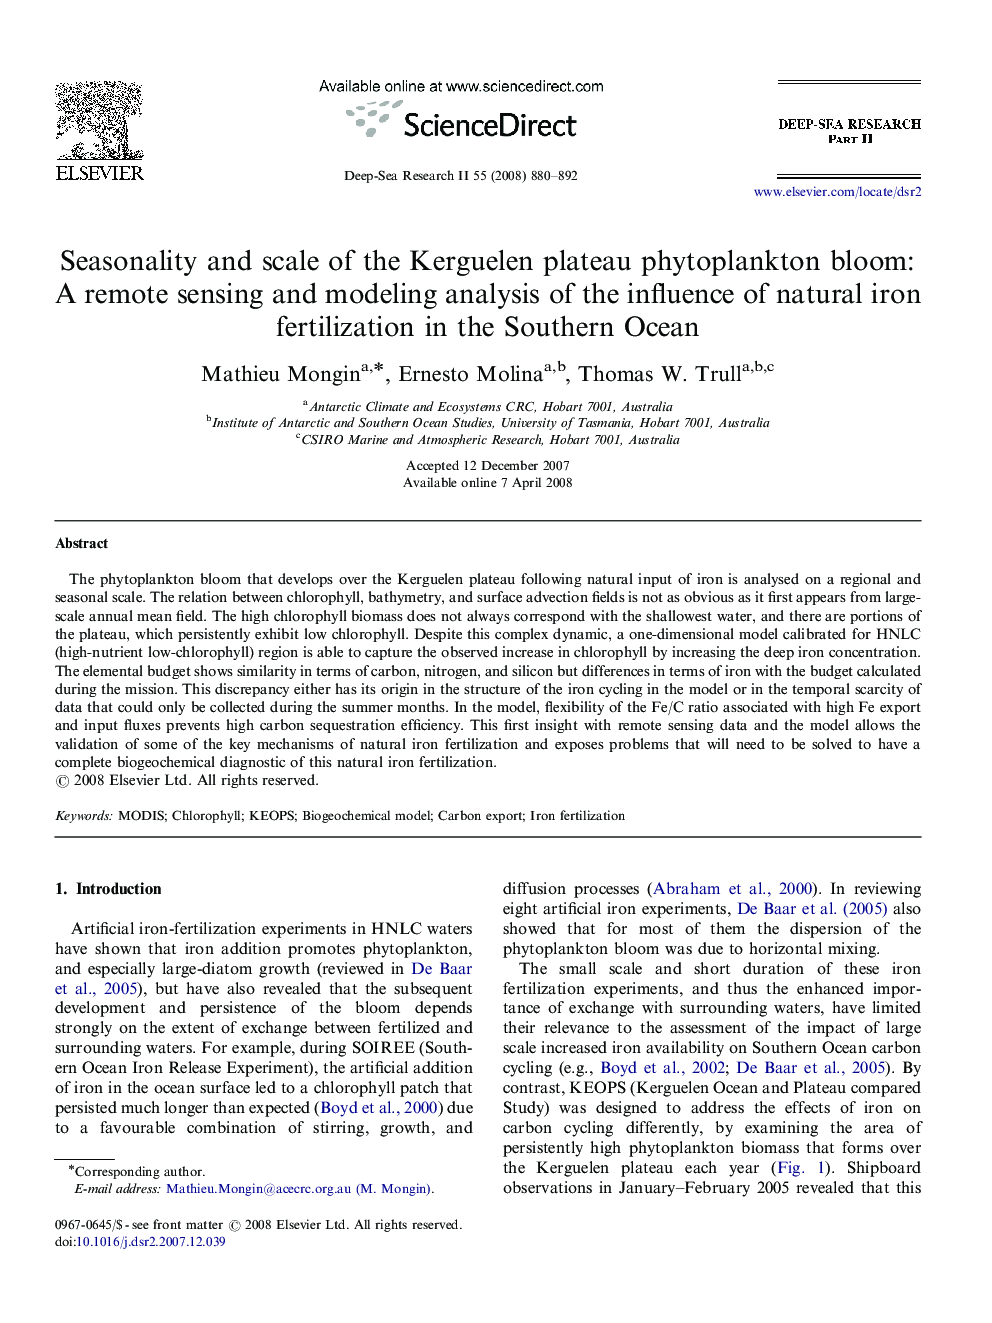 Seasonality and scale of the Kerguelen plateau phytoplankton bloom: A remote sensing and modeling analysis of the influence of natural iron fertilization in the Southern Ocean